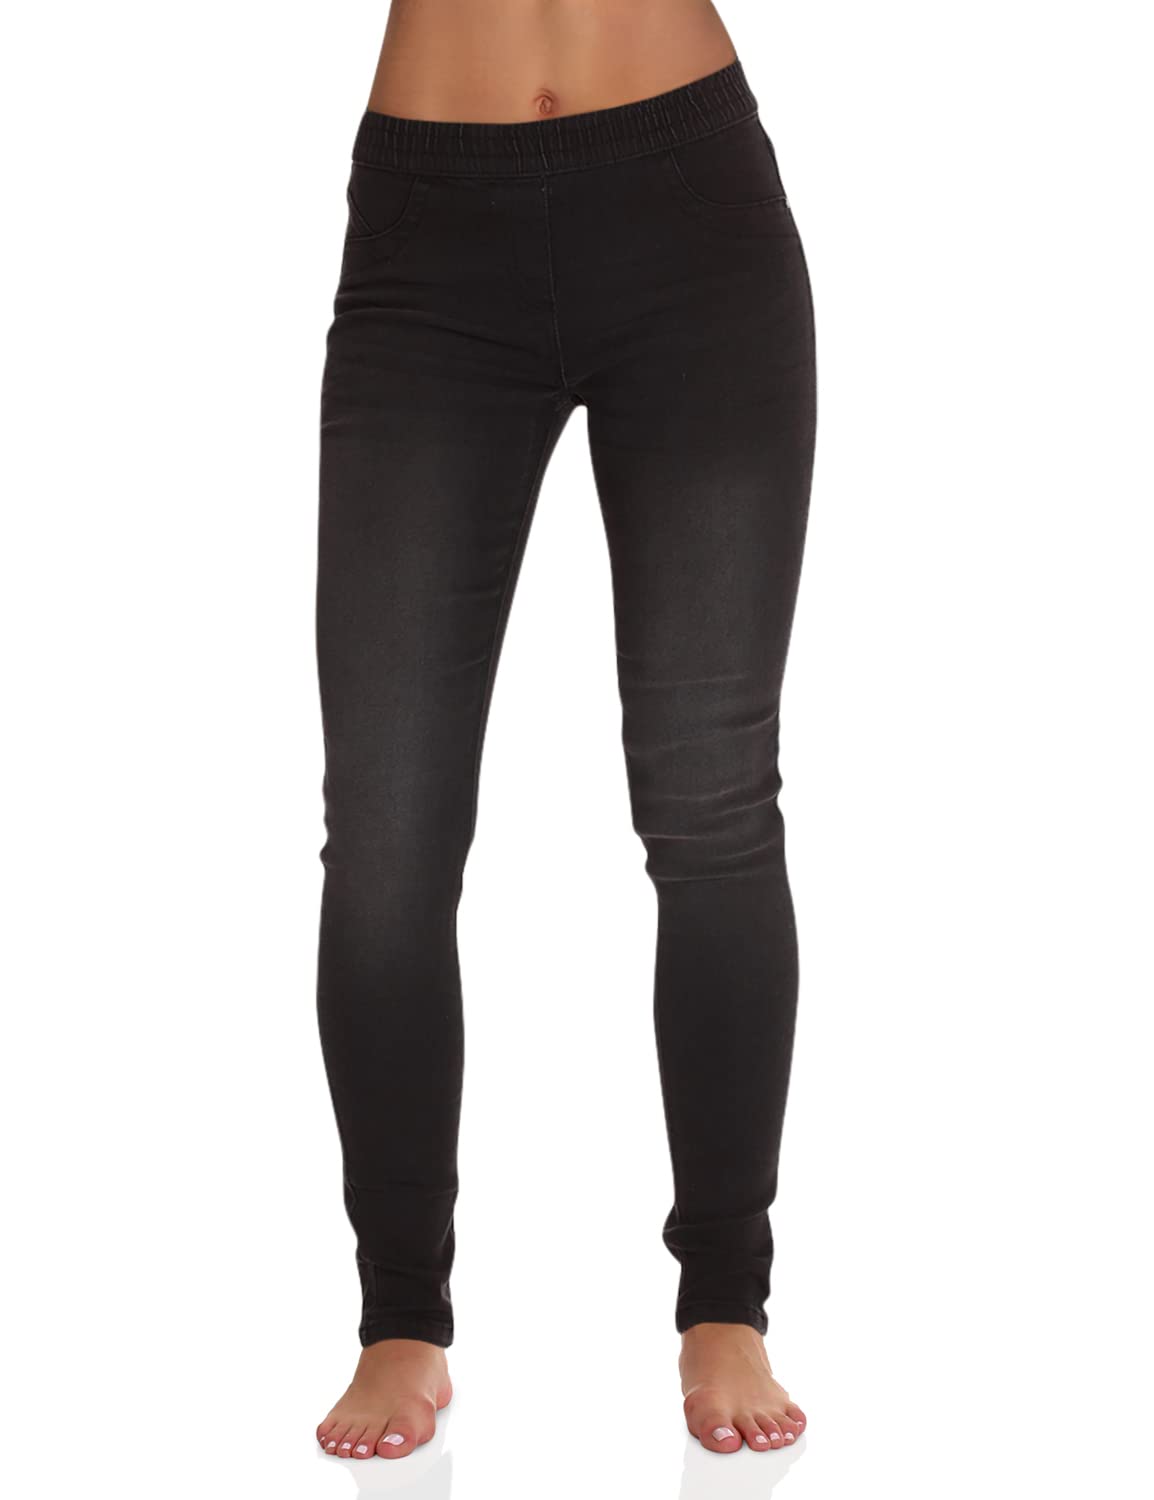 Just Love Women's Denim Jeggings with Pockets - Comfortable Stretch Jeans Leggings (Black Denim, Small) - image 1 of 2